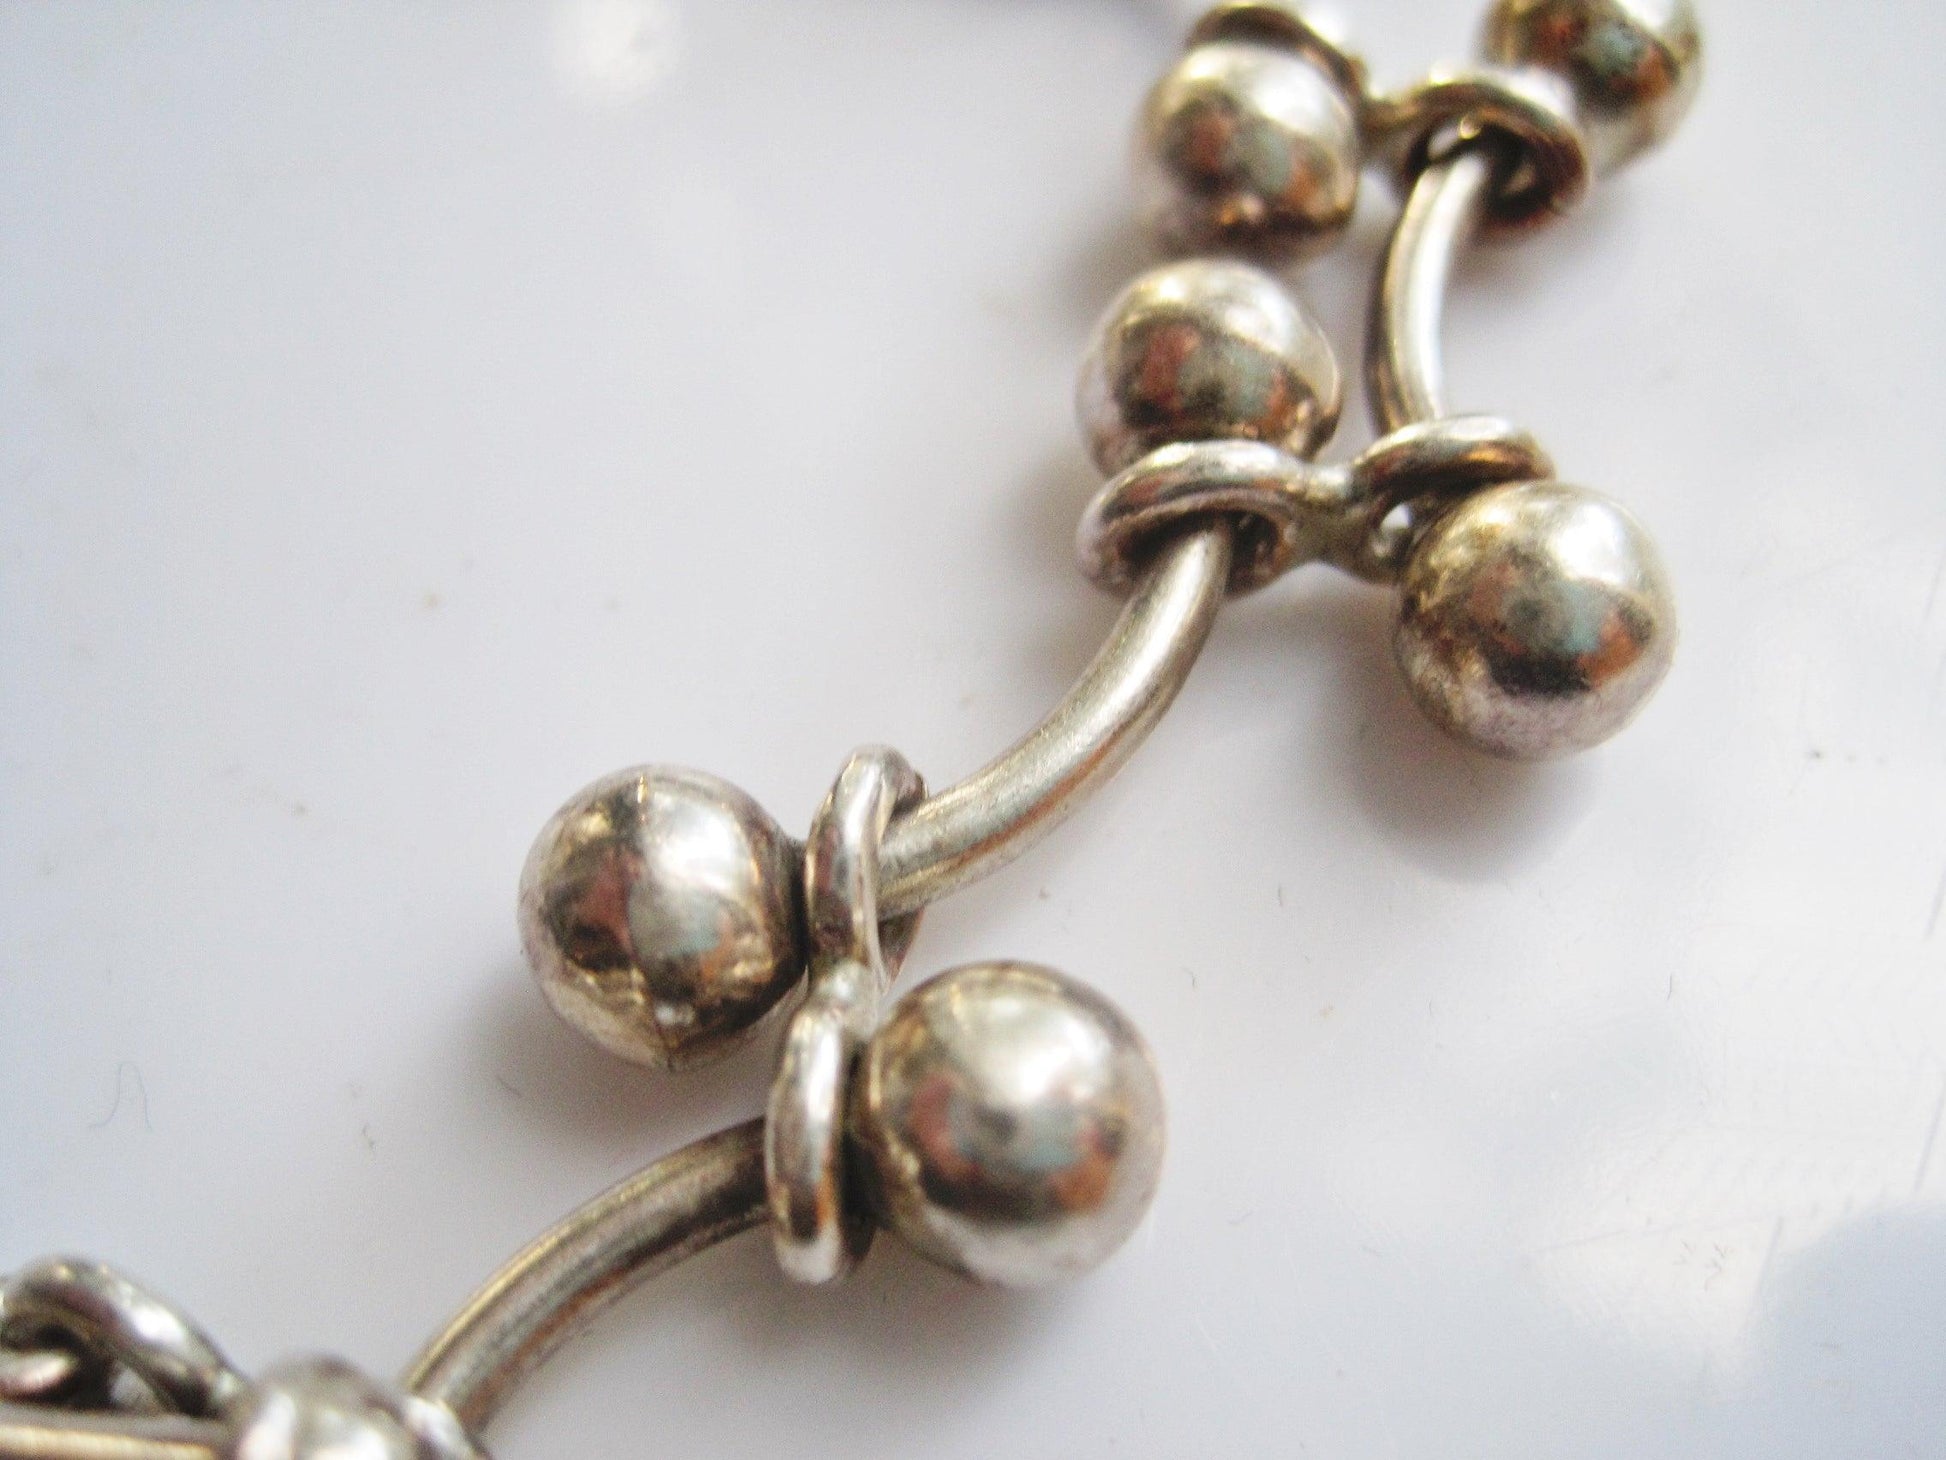 Vintage Sterling Silver Ball and Link Chain Bracelet - Anteeka